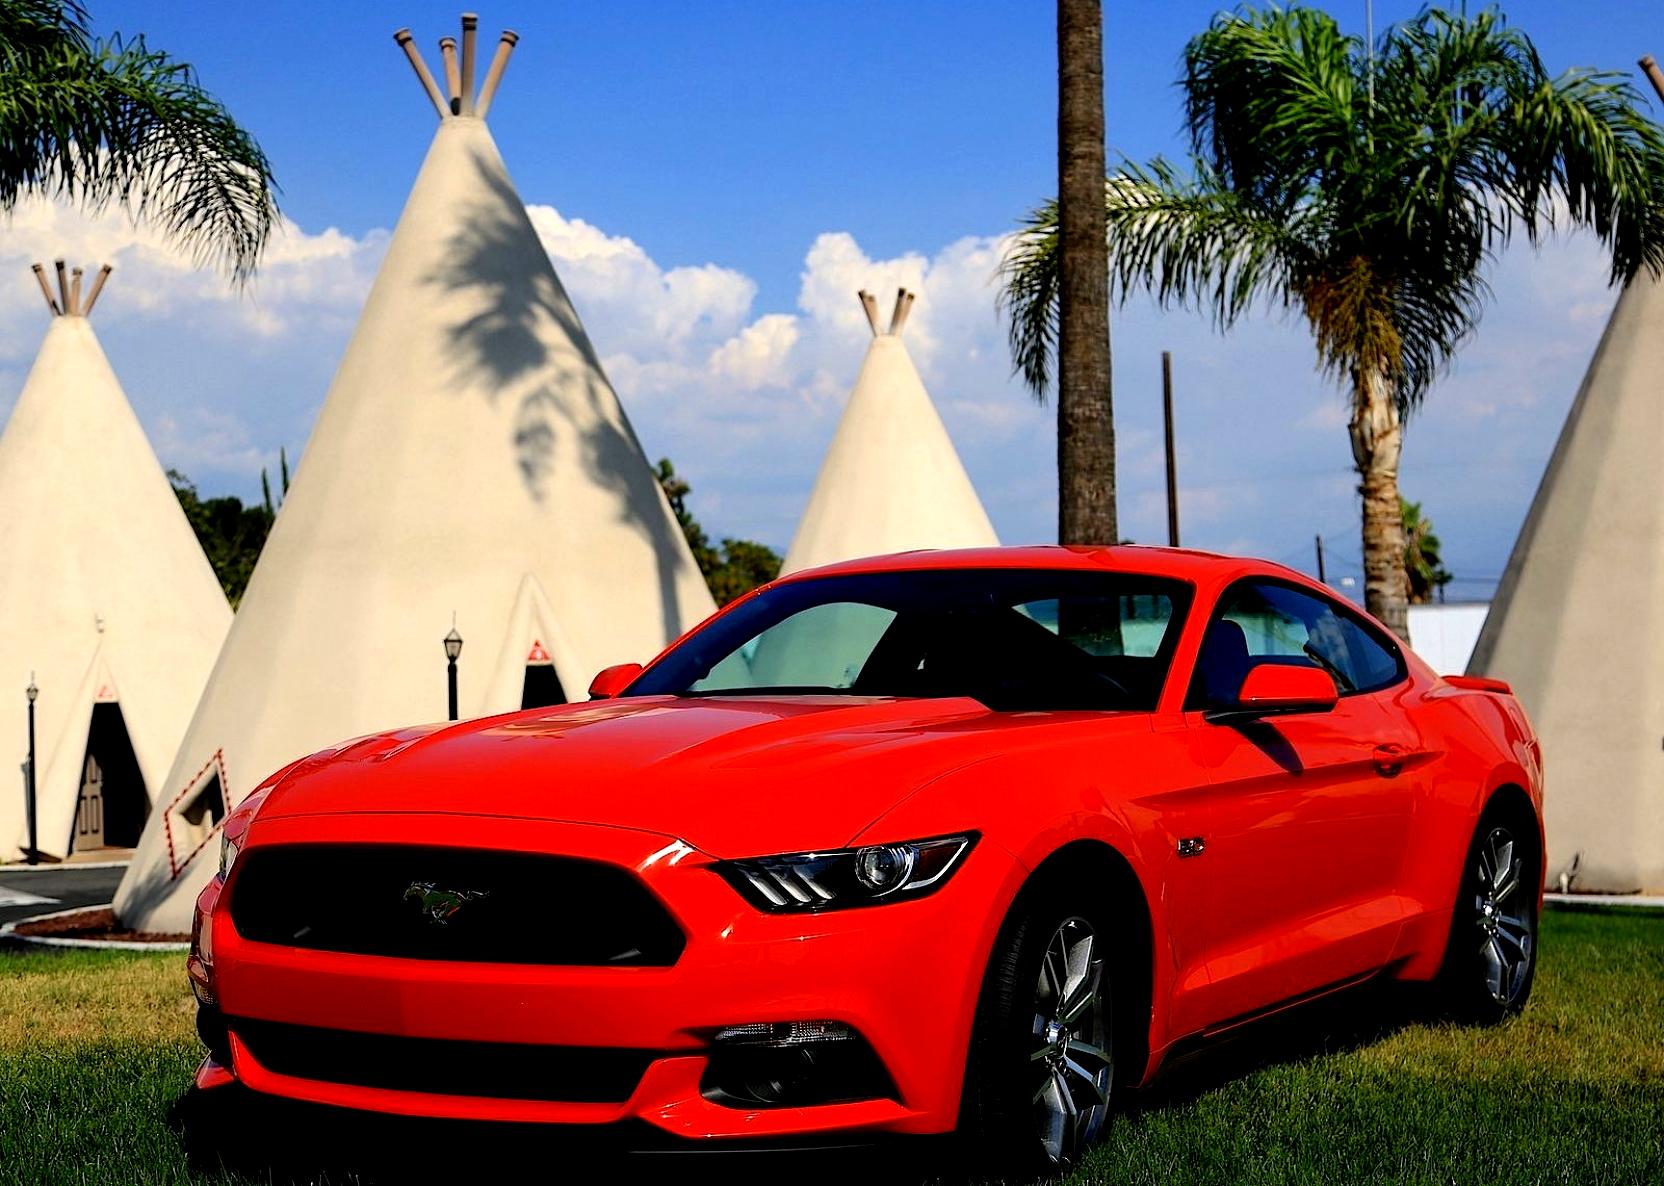 Ford Mustang 2014 #90